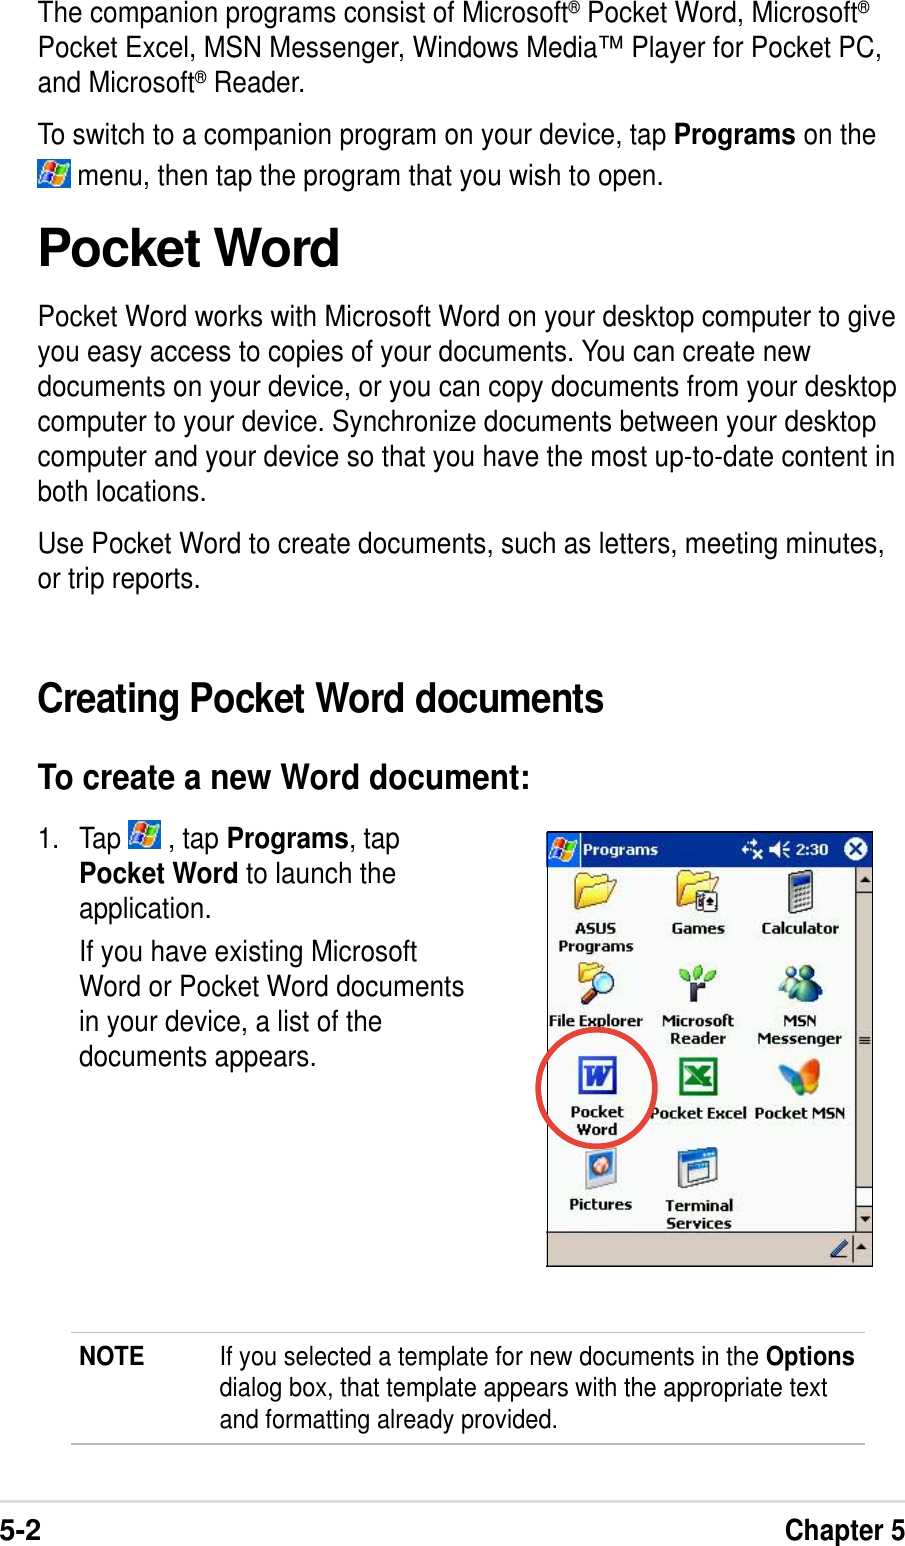 5-2Chapter 5The companion programs consist of Microsoft® Pocket Word, Microsoft®Pocket Excel, MSN Messenger, Windows Media™ Player for Pocket PC,and Microsoft® Reader.To switch to a companion program on your device, tap Programs on the menu, then tap the program that you wish to open.Pocket WordPocket Word works with Microsoft Word on your desktop computer to giveyou easy access to copies of your documents. You can create newdocuments on your device, or you can copy documents from your desktopcomputer to your device. Synchronize documents between your desktopcomputer and your device so that you have the most up-to-date content inboth locations.Use Pocket Word to create documents, such as letters, meeting minutes,or trip reports.1. Tap   , tap Programs, tapPocket Word to launch theapplication.If you have existing MicrosoftWord or Pocket Word documentsin your device, a list of thedocuments appears.Creating Pocket Word documentsTo create a new Word document:NOTE If you selected a template for new documents in the Optionsdialog box, that template appears with the appropriate textand formatting already provided.